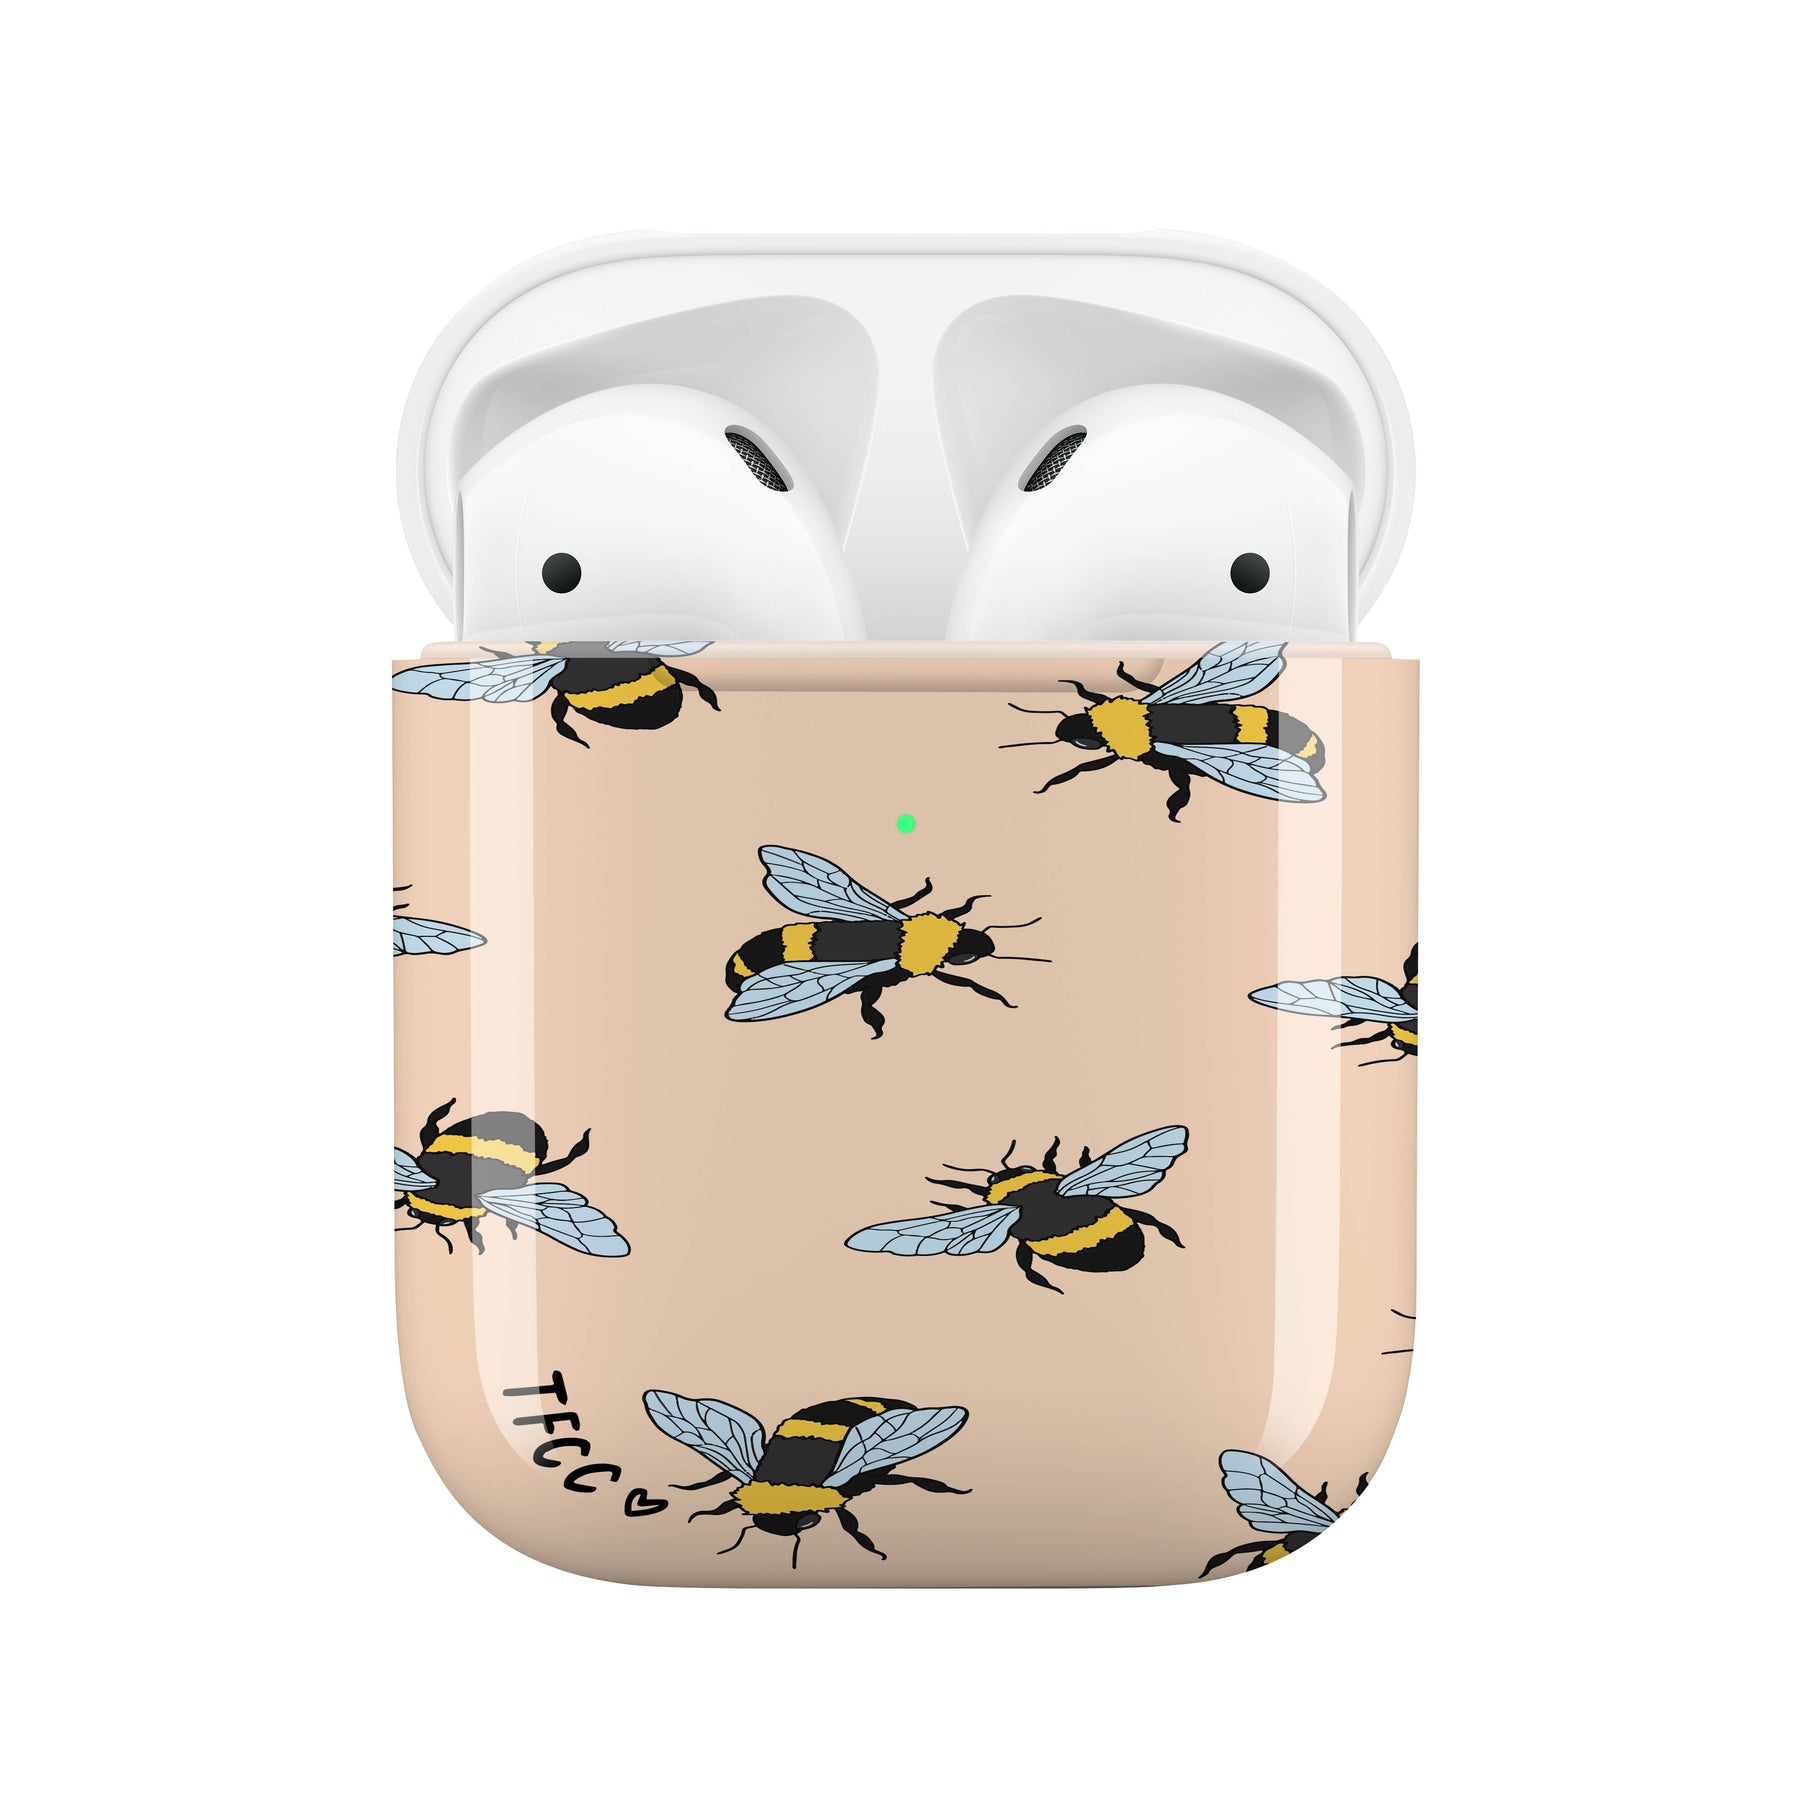 BEE AirPods Case - thefonecasecompany